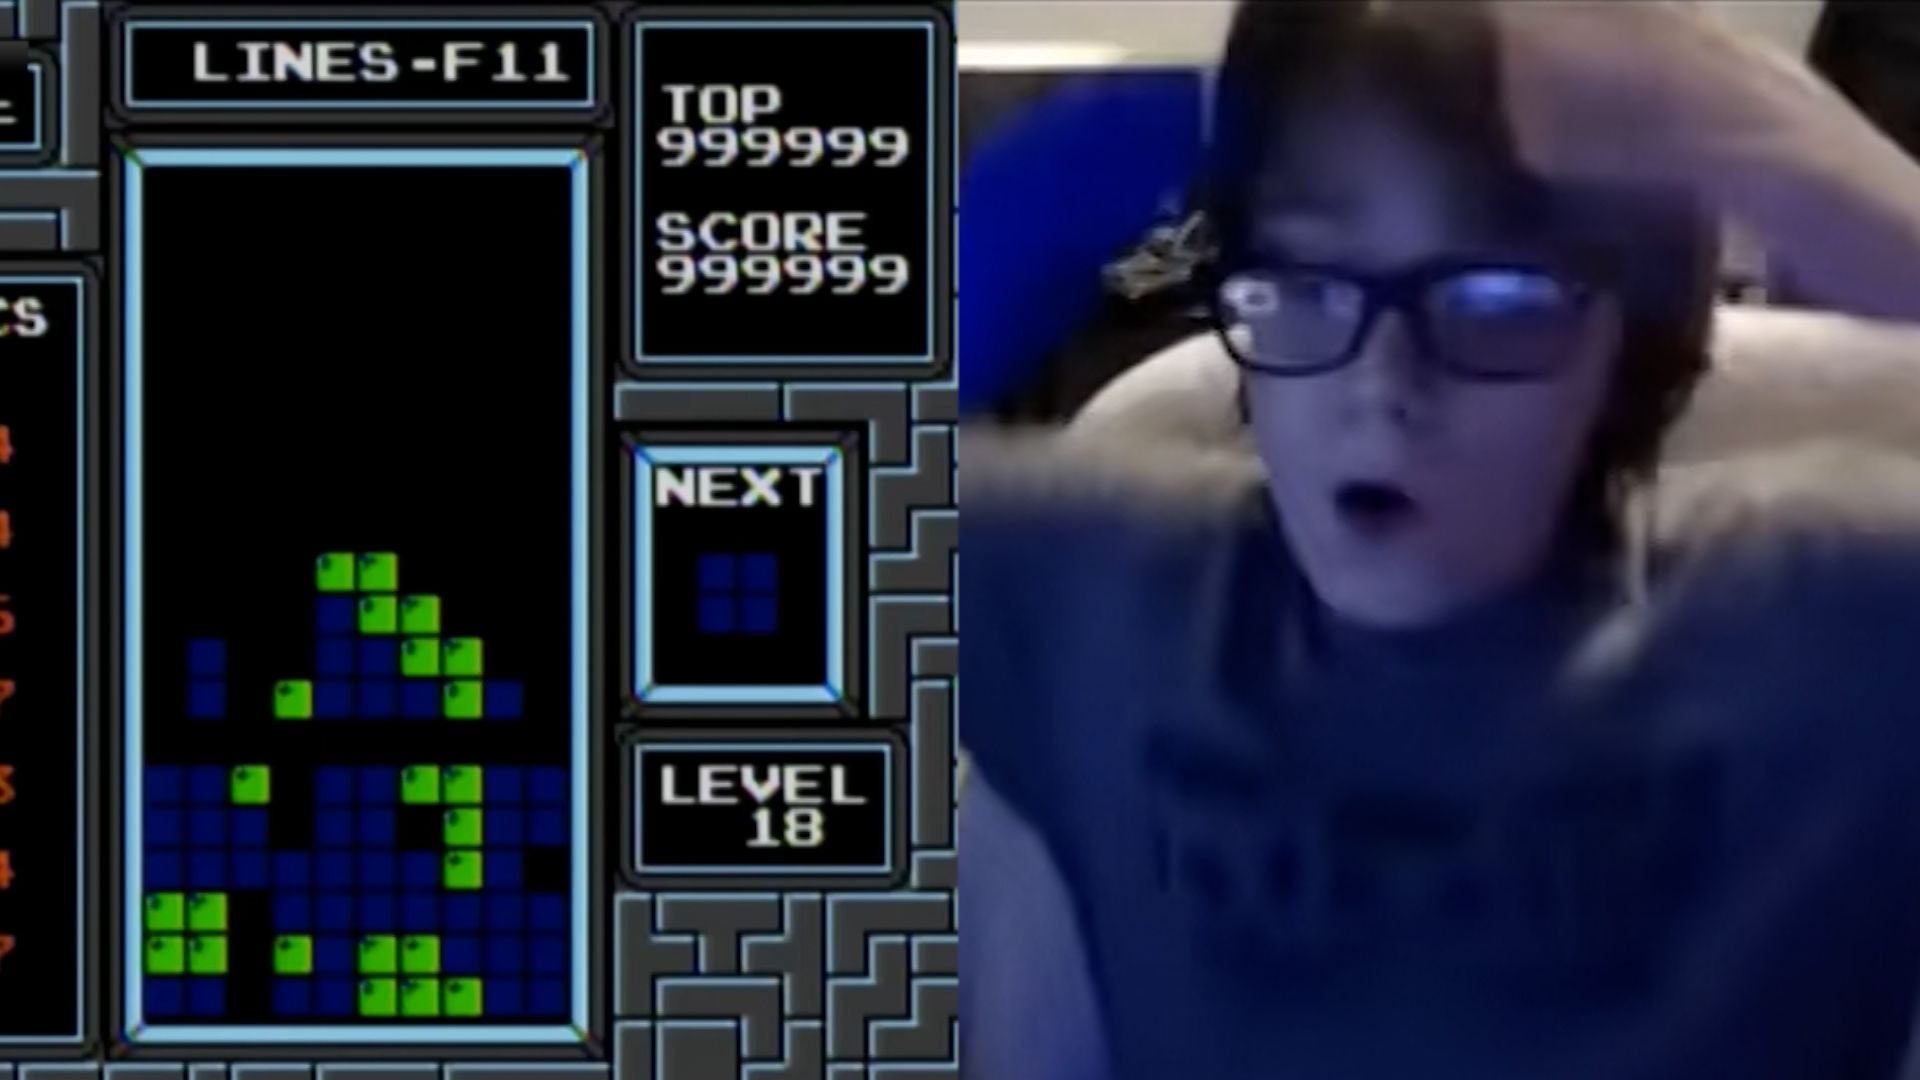 See Tetris president's reaction after 13-year-old appears to break the game